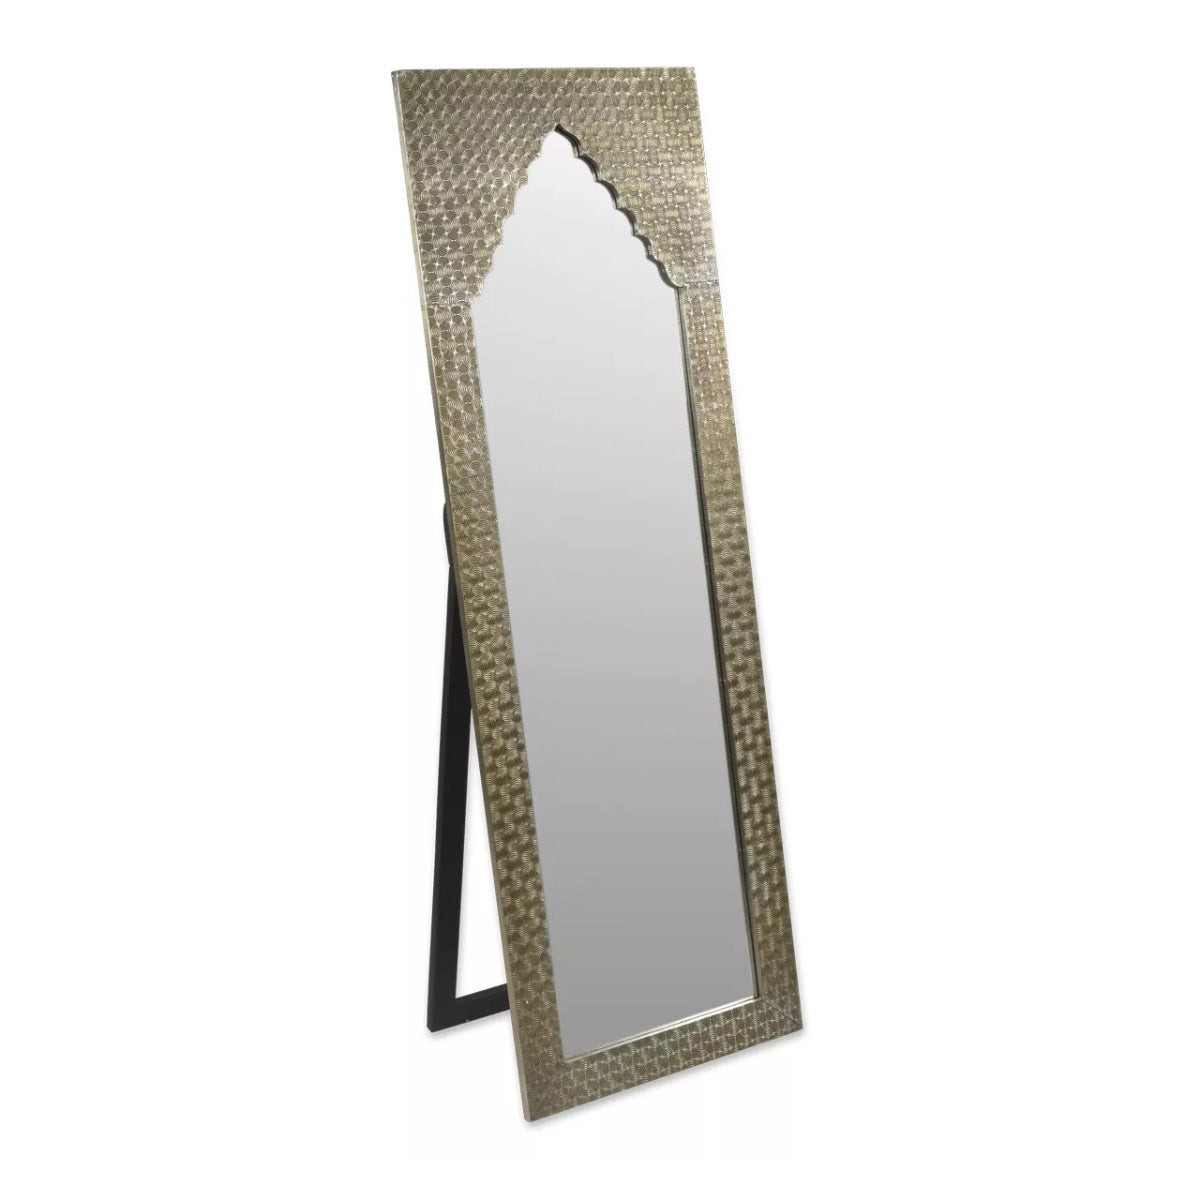 Kasbah Full Length Mirror with Folding Stand - Silver